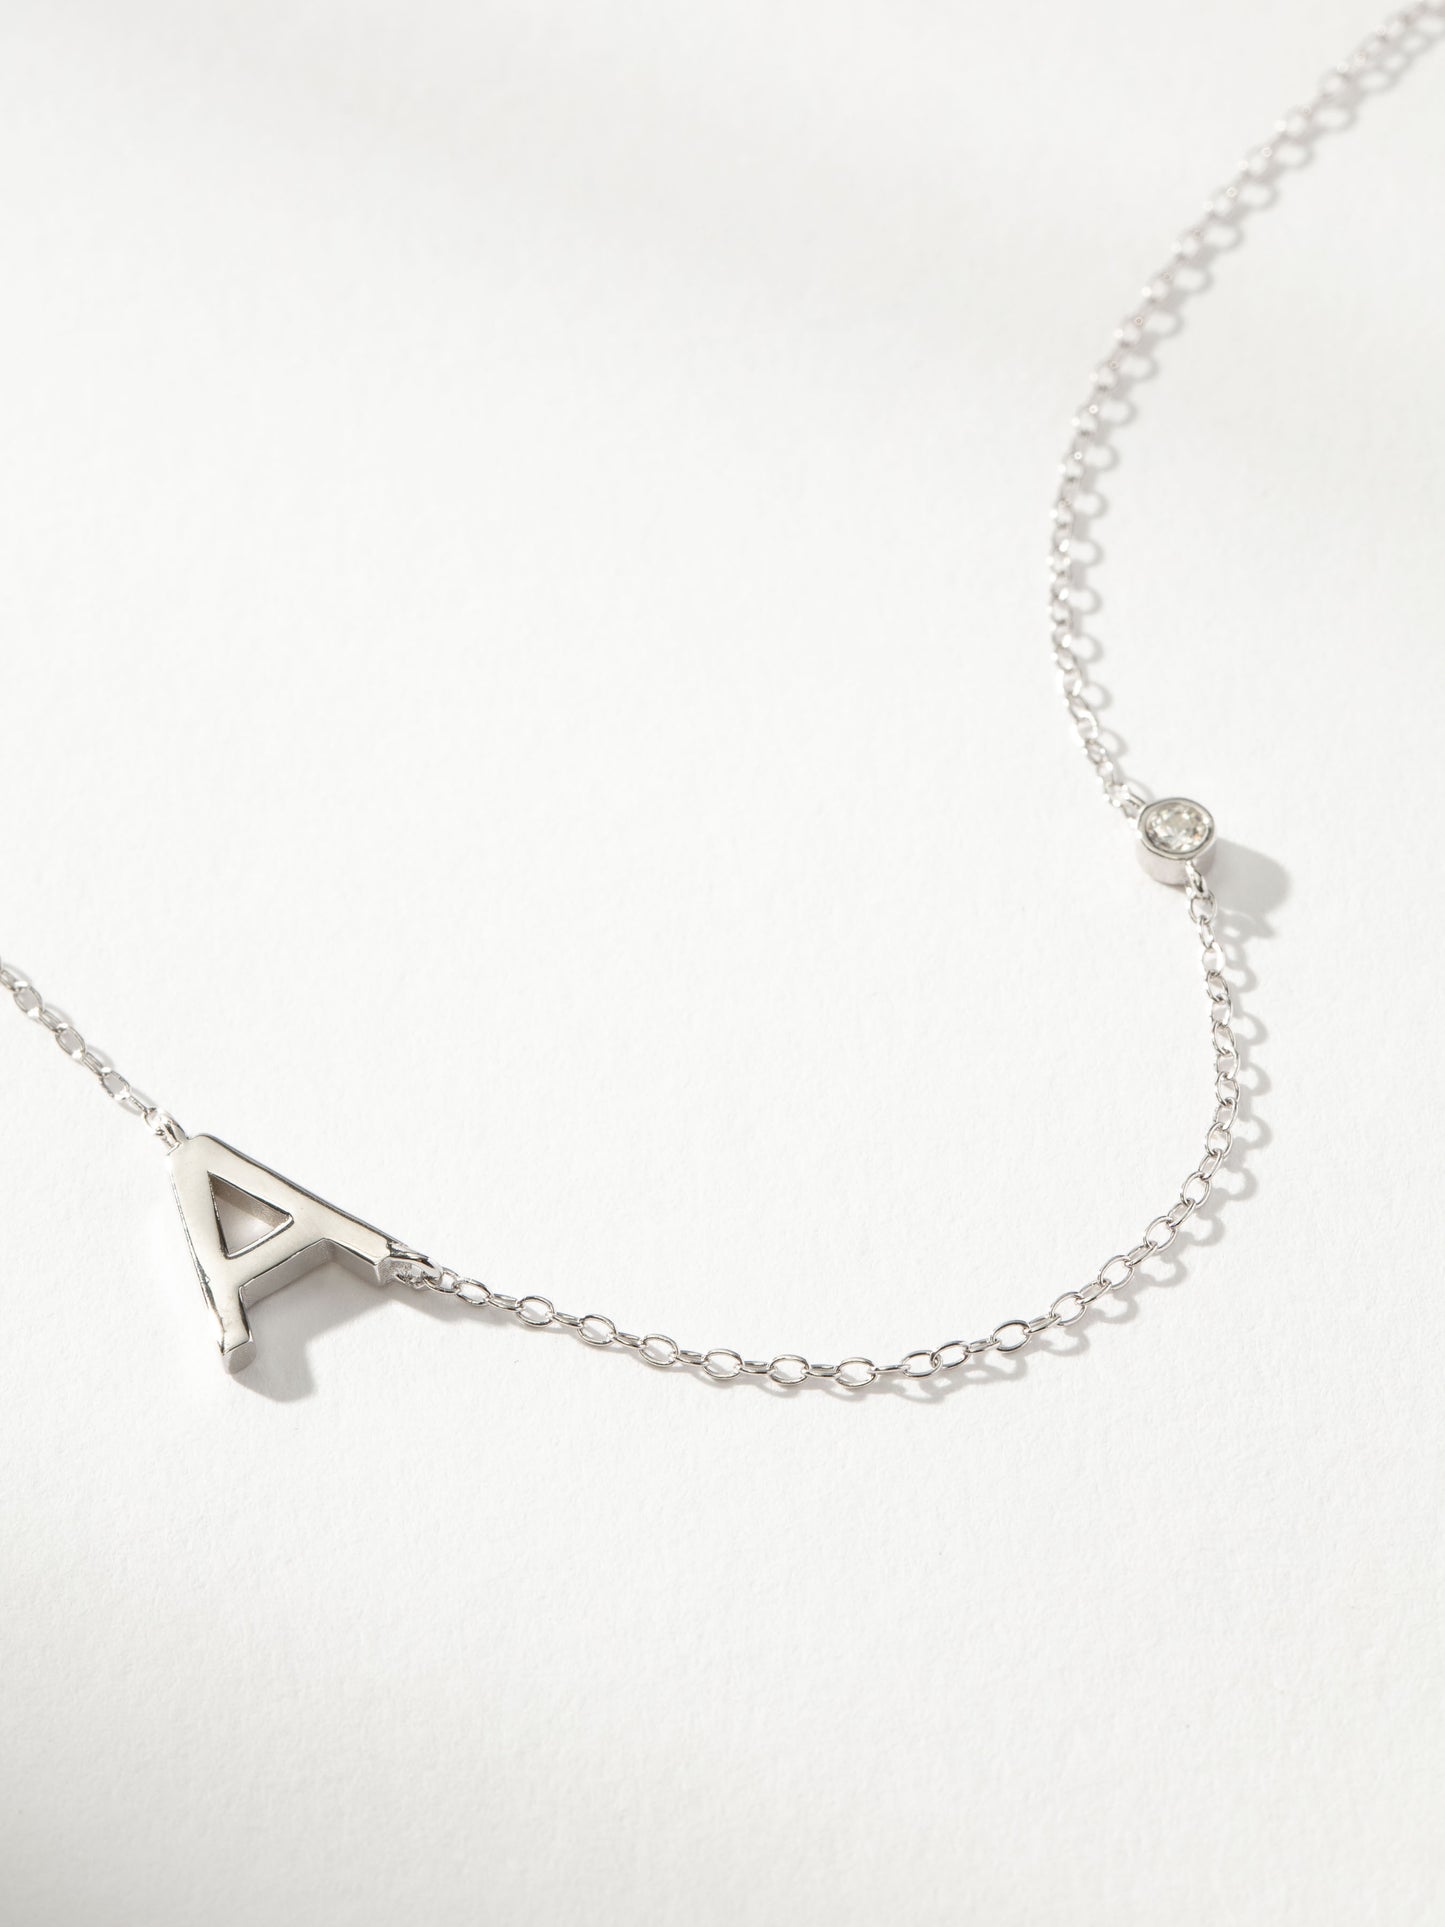 Personalized Touch Necklace | Sterling Silver A | Product Image | Uncommon James